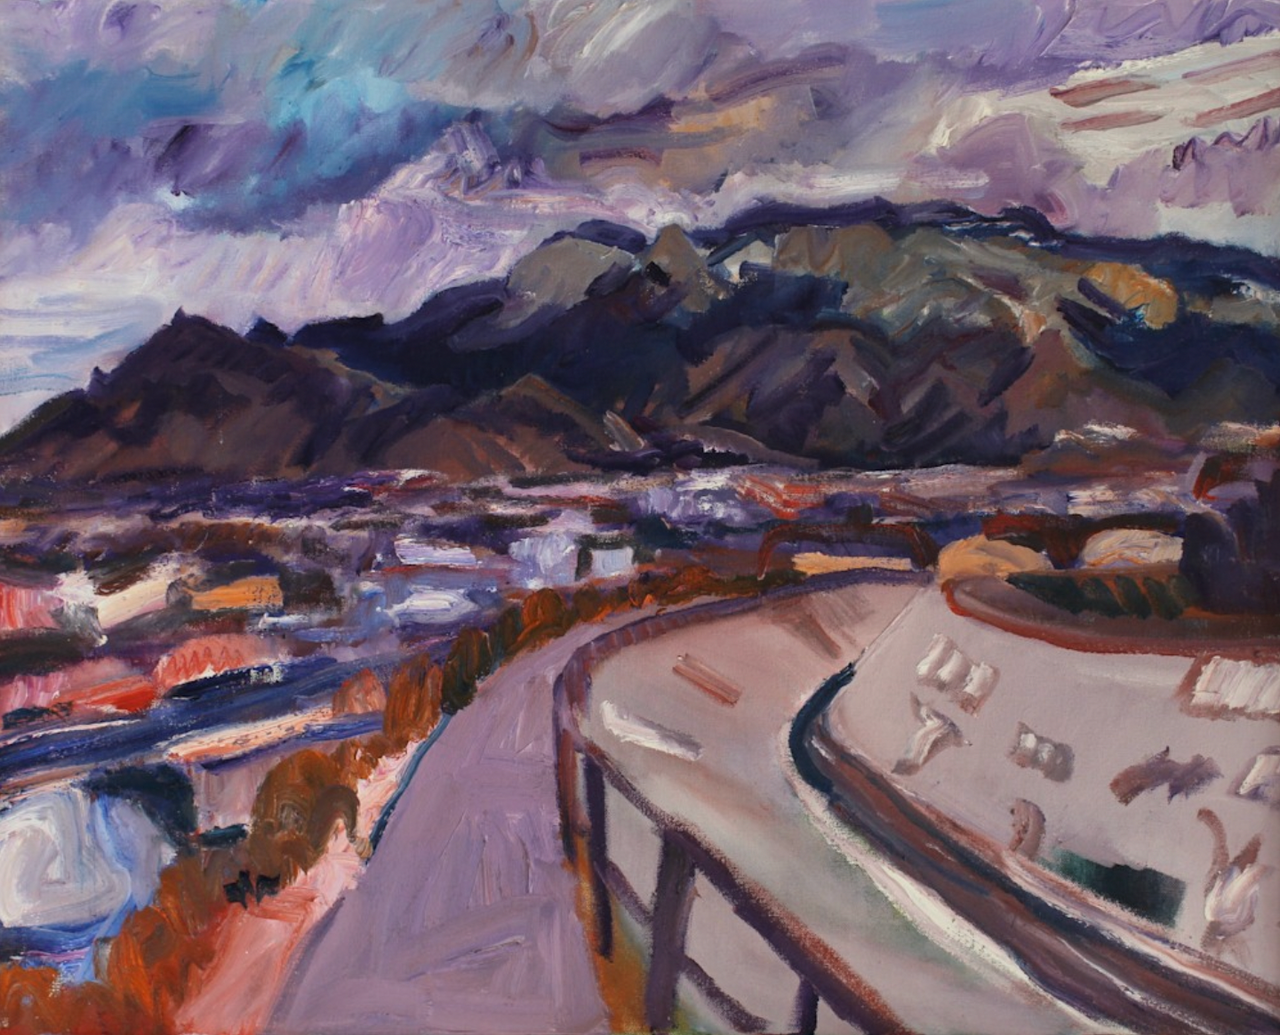 "Cold Sandias" by Chris Easley